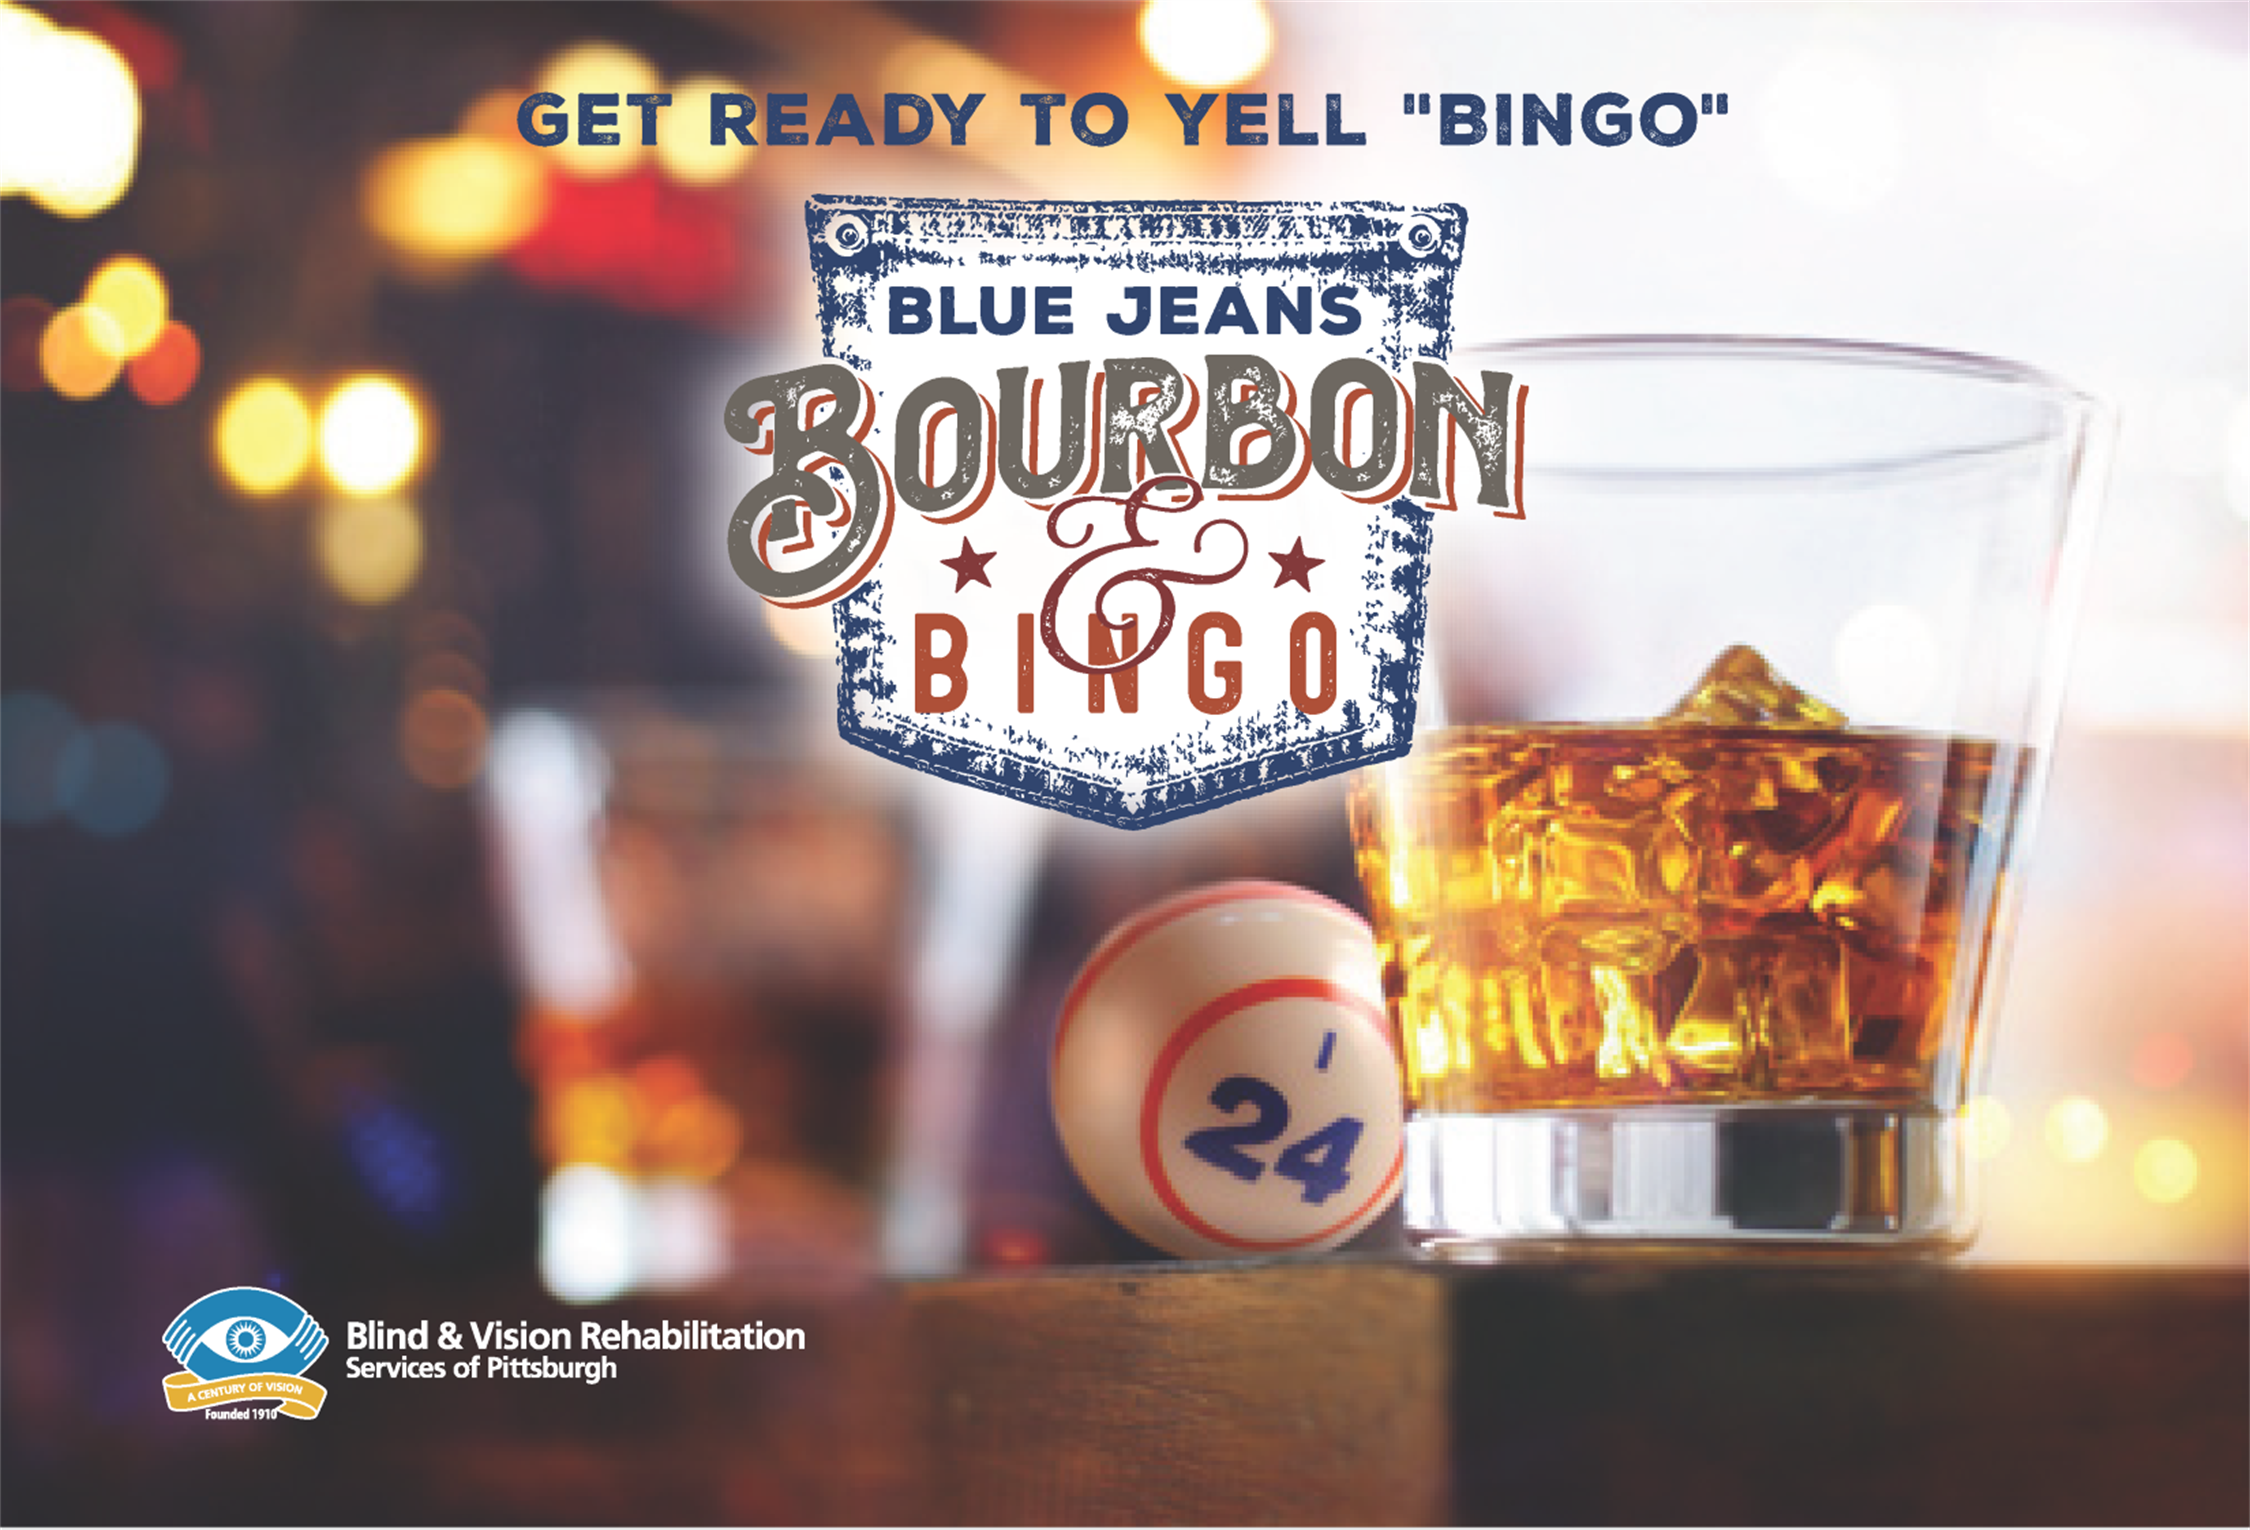 Get ready to yell "BINGO"; Blue Jeans, Bourbon & Bingo (on a graphic of a denim back pocket); Image of a Bingo Ball "I 24" resting against a glass of bourbon sitting on a table with another glass and lights in the background